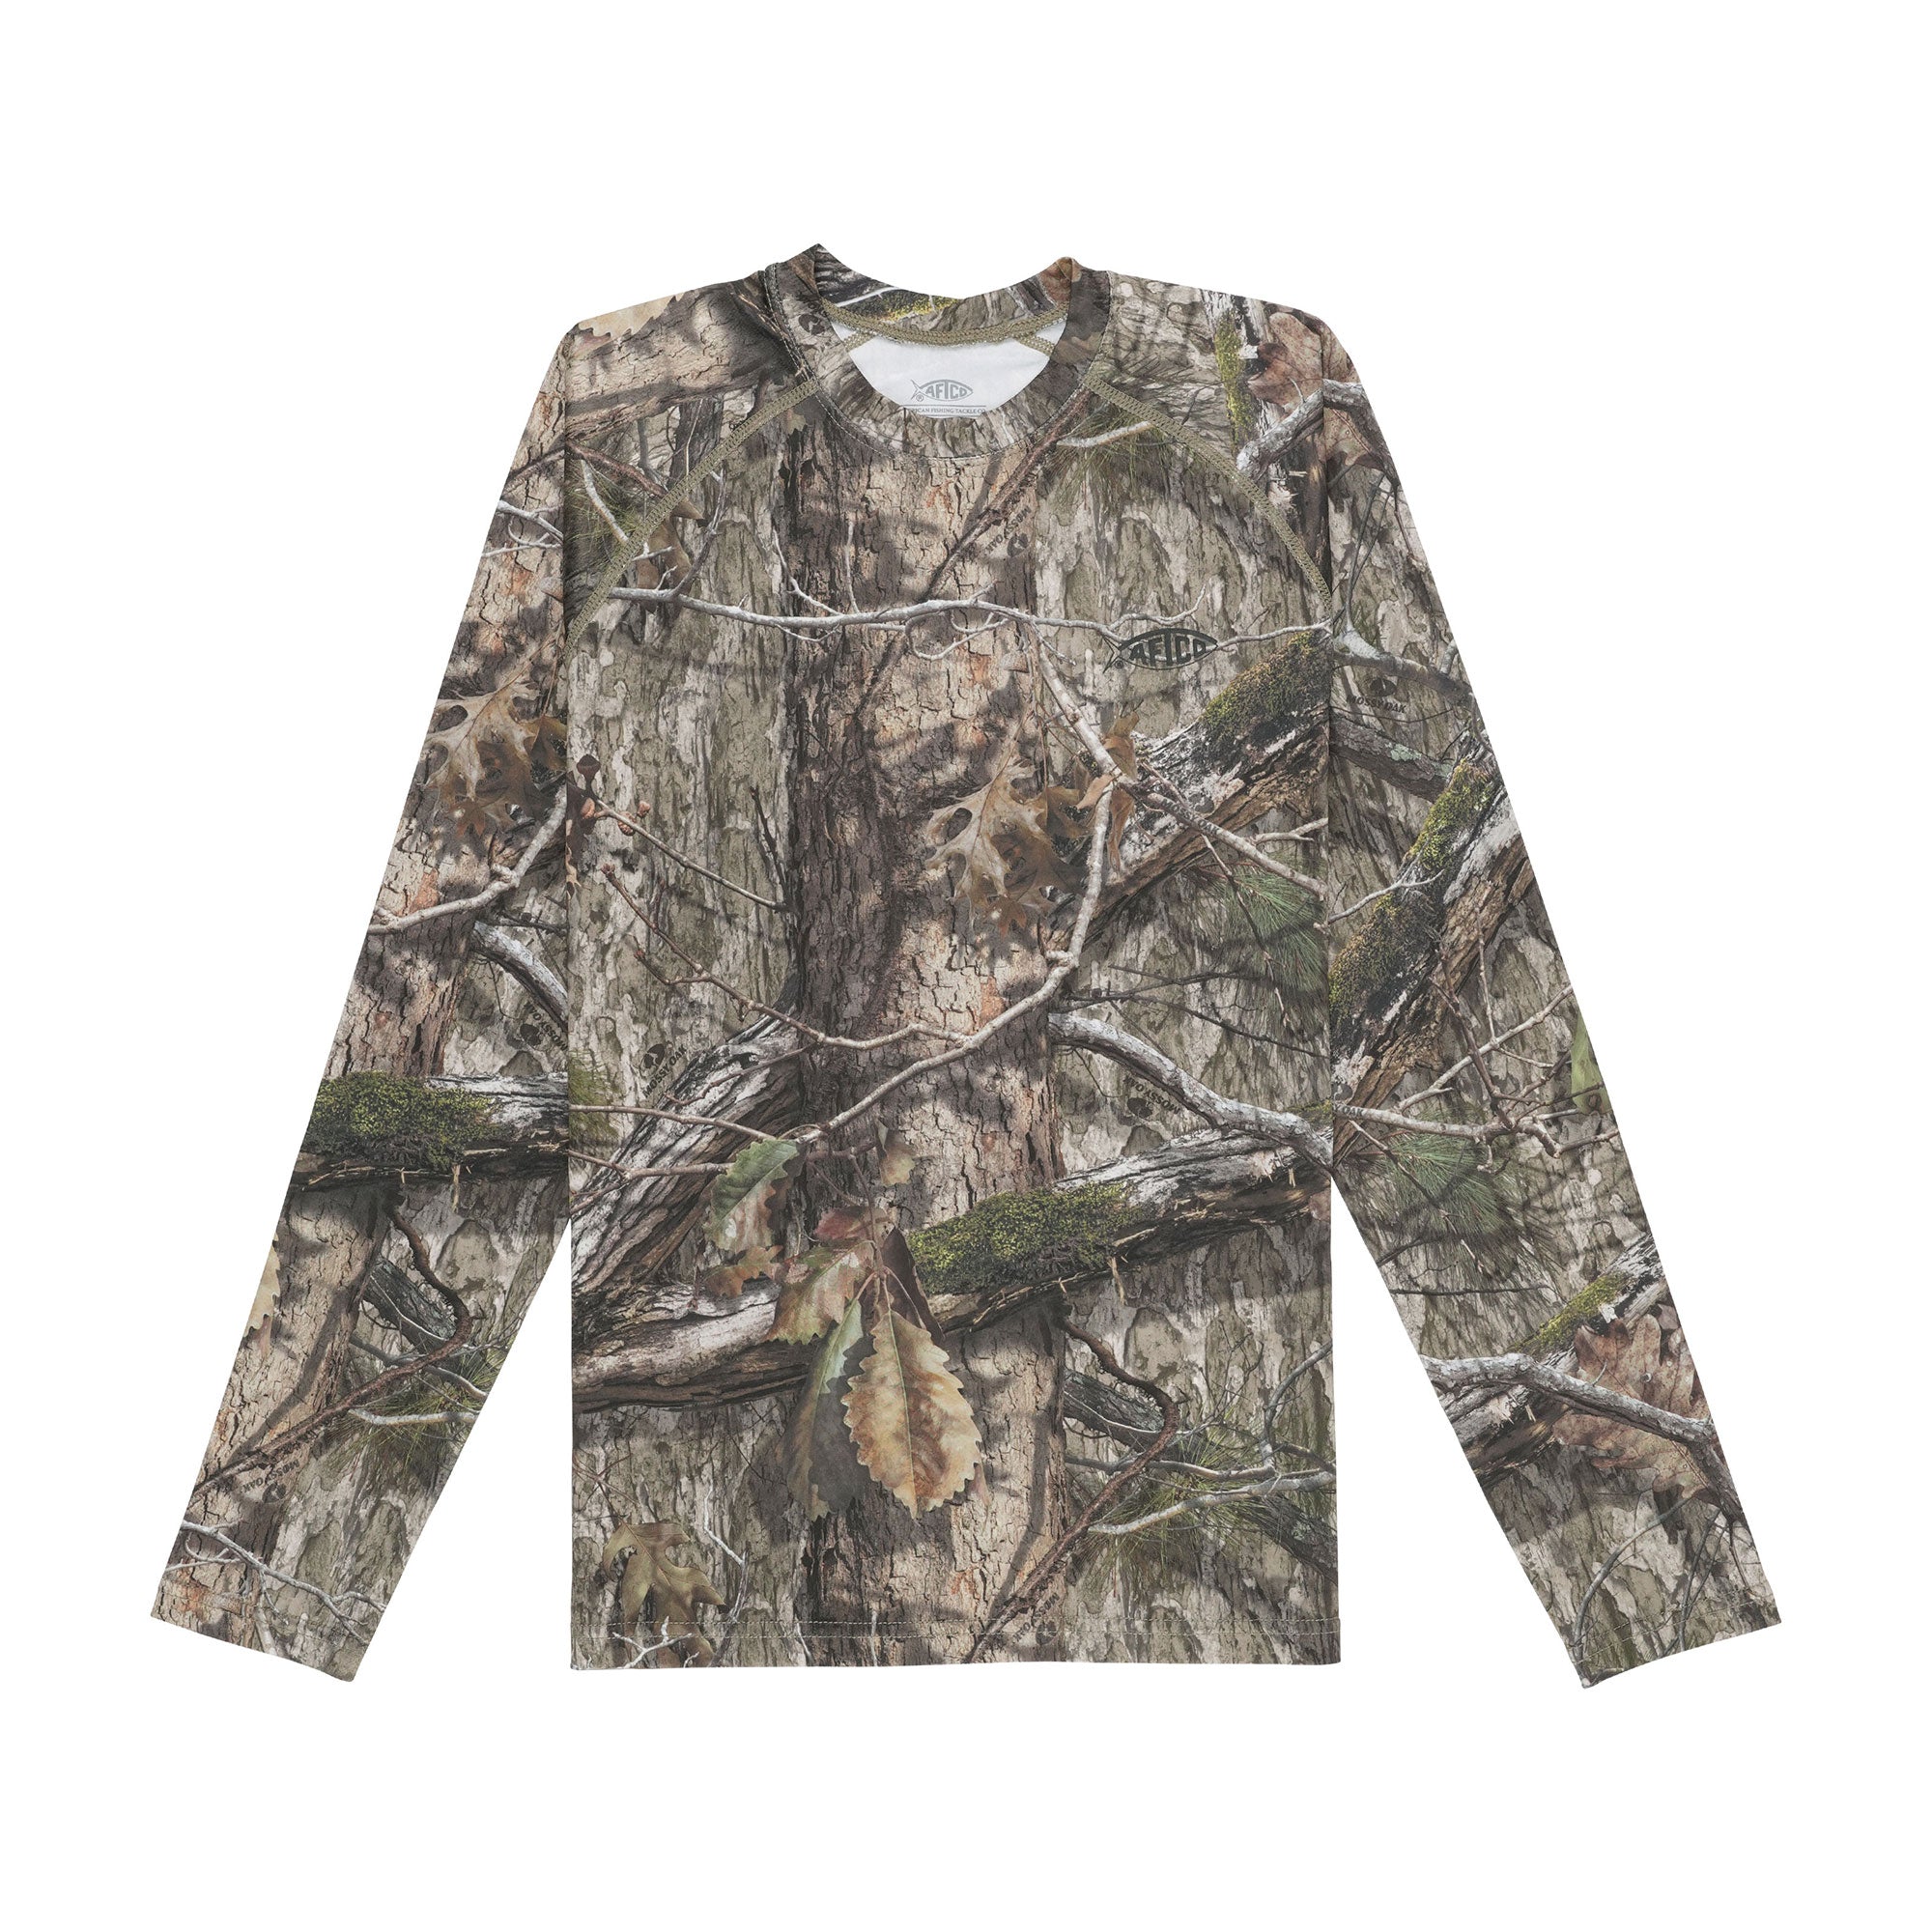 AFTCO Youth Mossy Oak Camo LS Performance Shirt Large